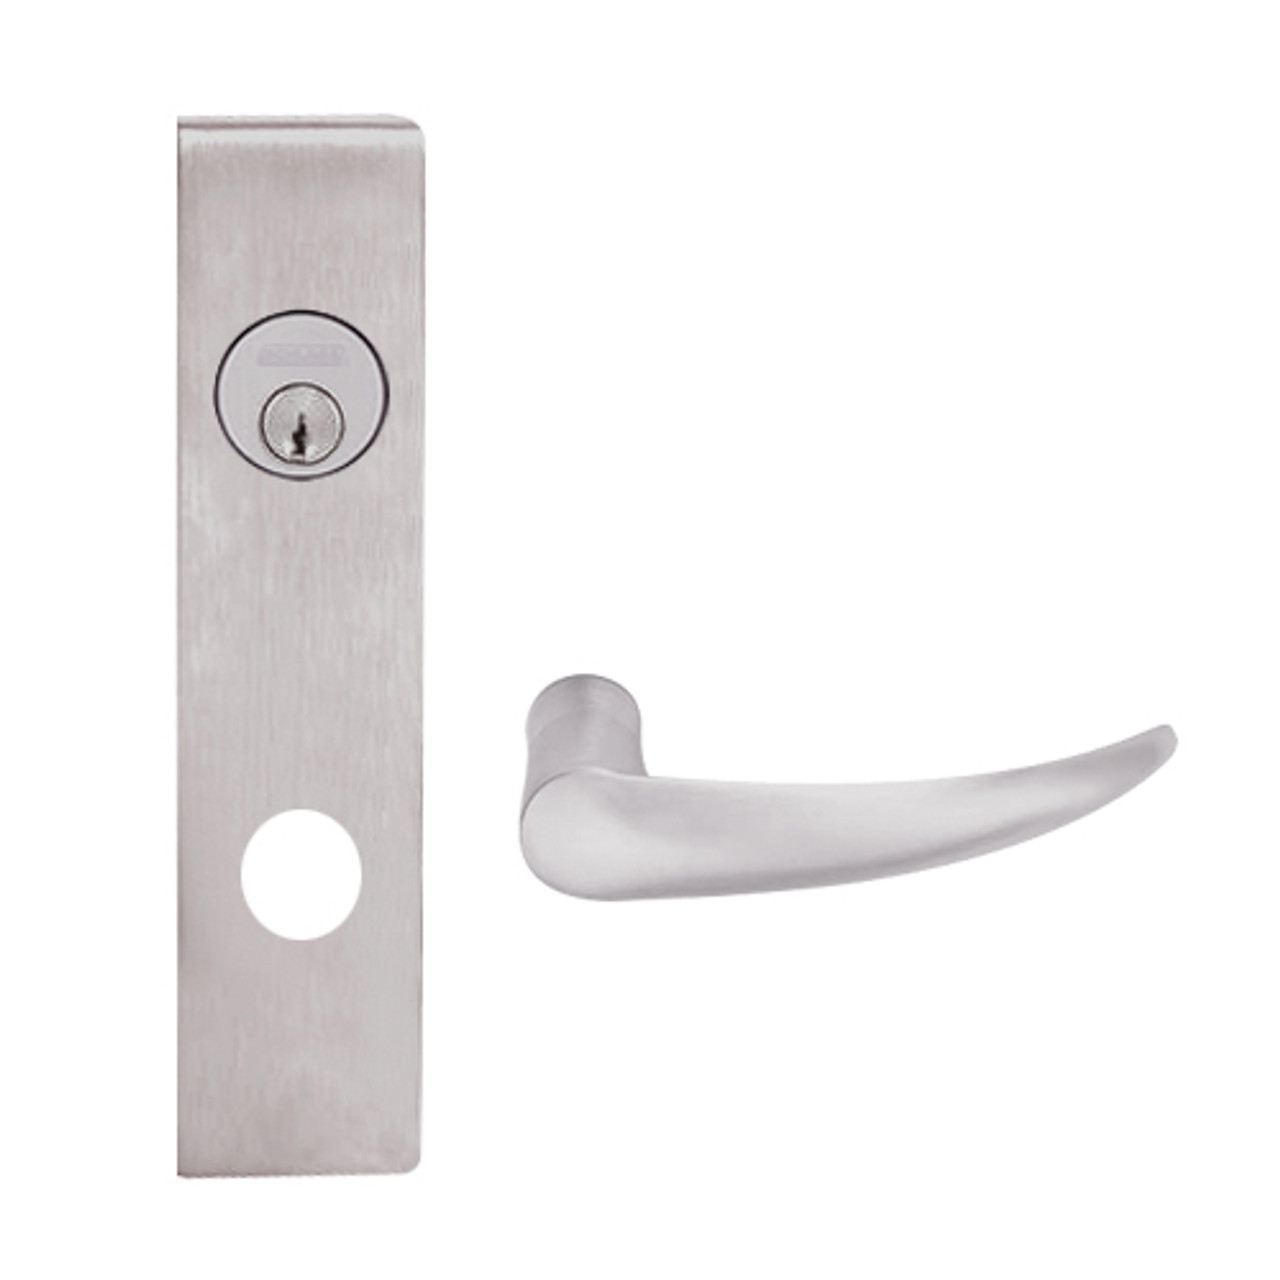 L9050P-OME-L-630 Schlage L Series Entrance Commercial Mortise Lock with Omega Lever Design in Satin Stainless Steel